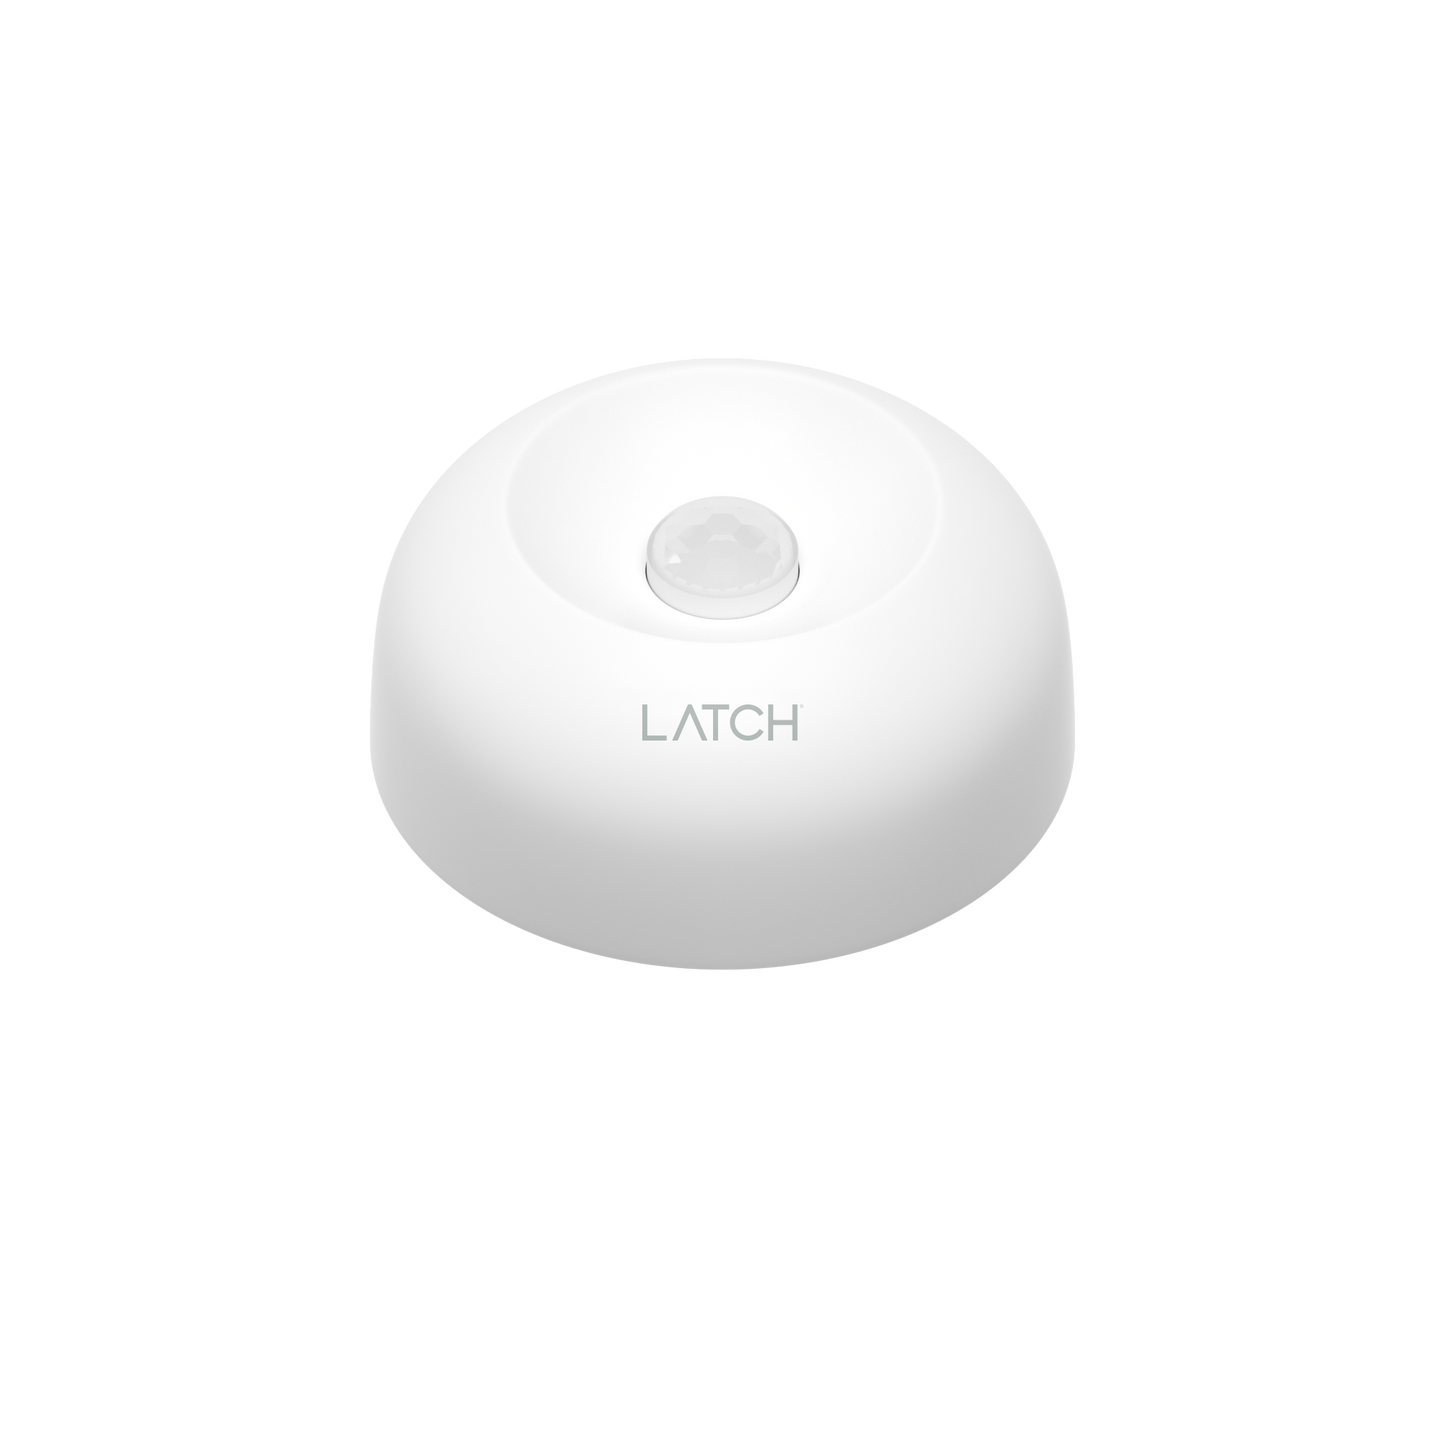 Latch Motion Detector (Pre-Order Now, Shipping in Q2)